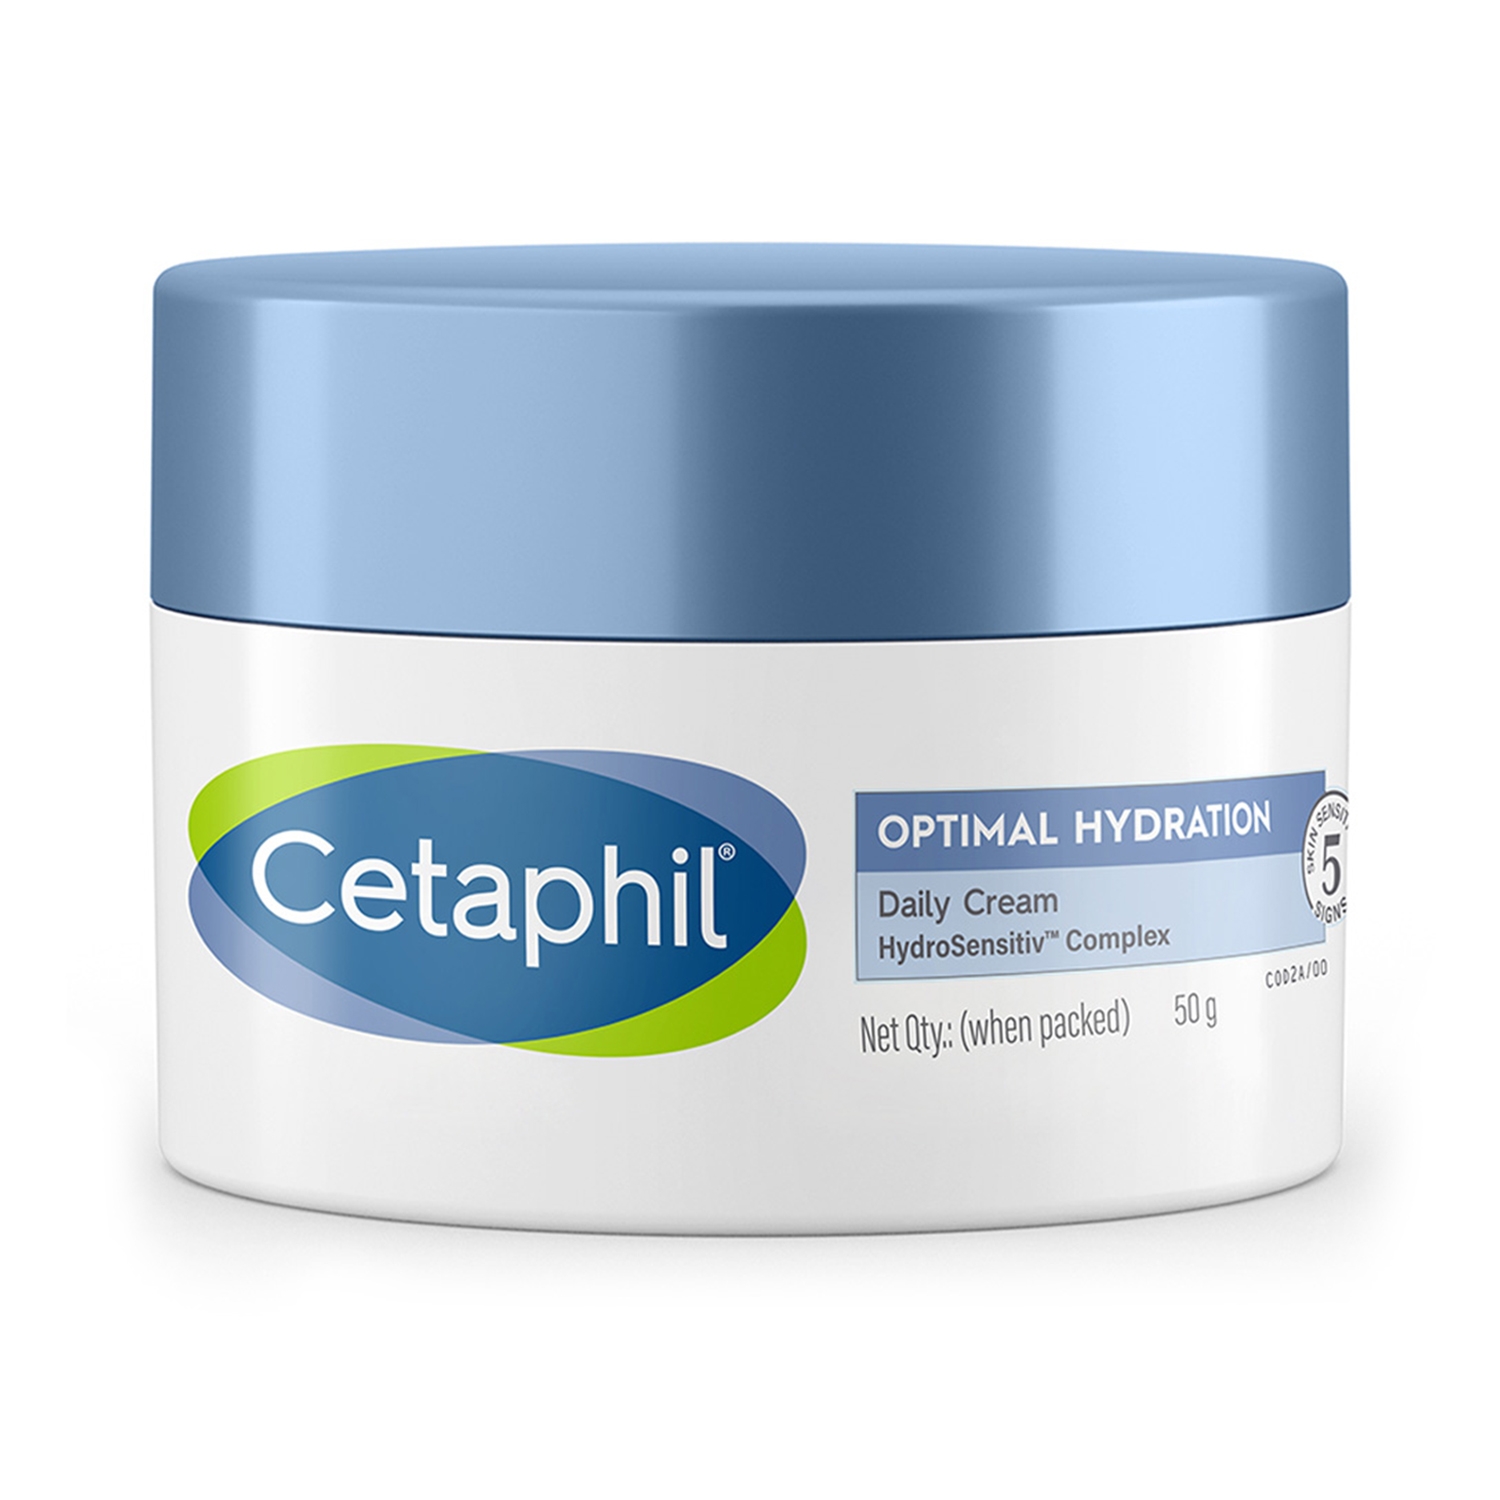 Cetaphil | Cetaphil Optimal Hydration Daily Cream with Hyaluronic Acid For Dehydrated Skin (50g)